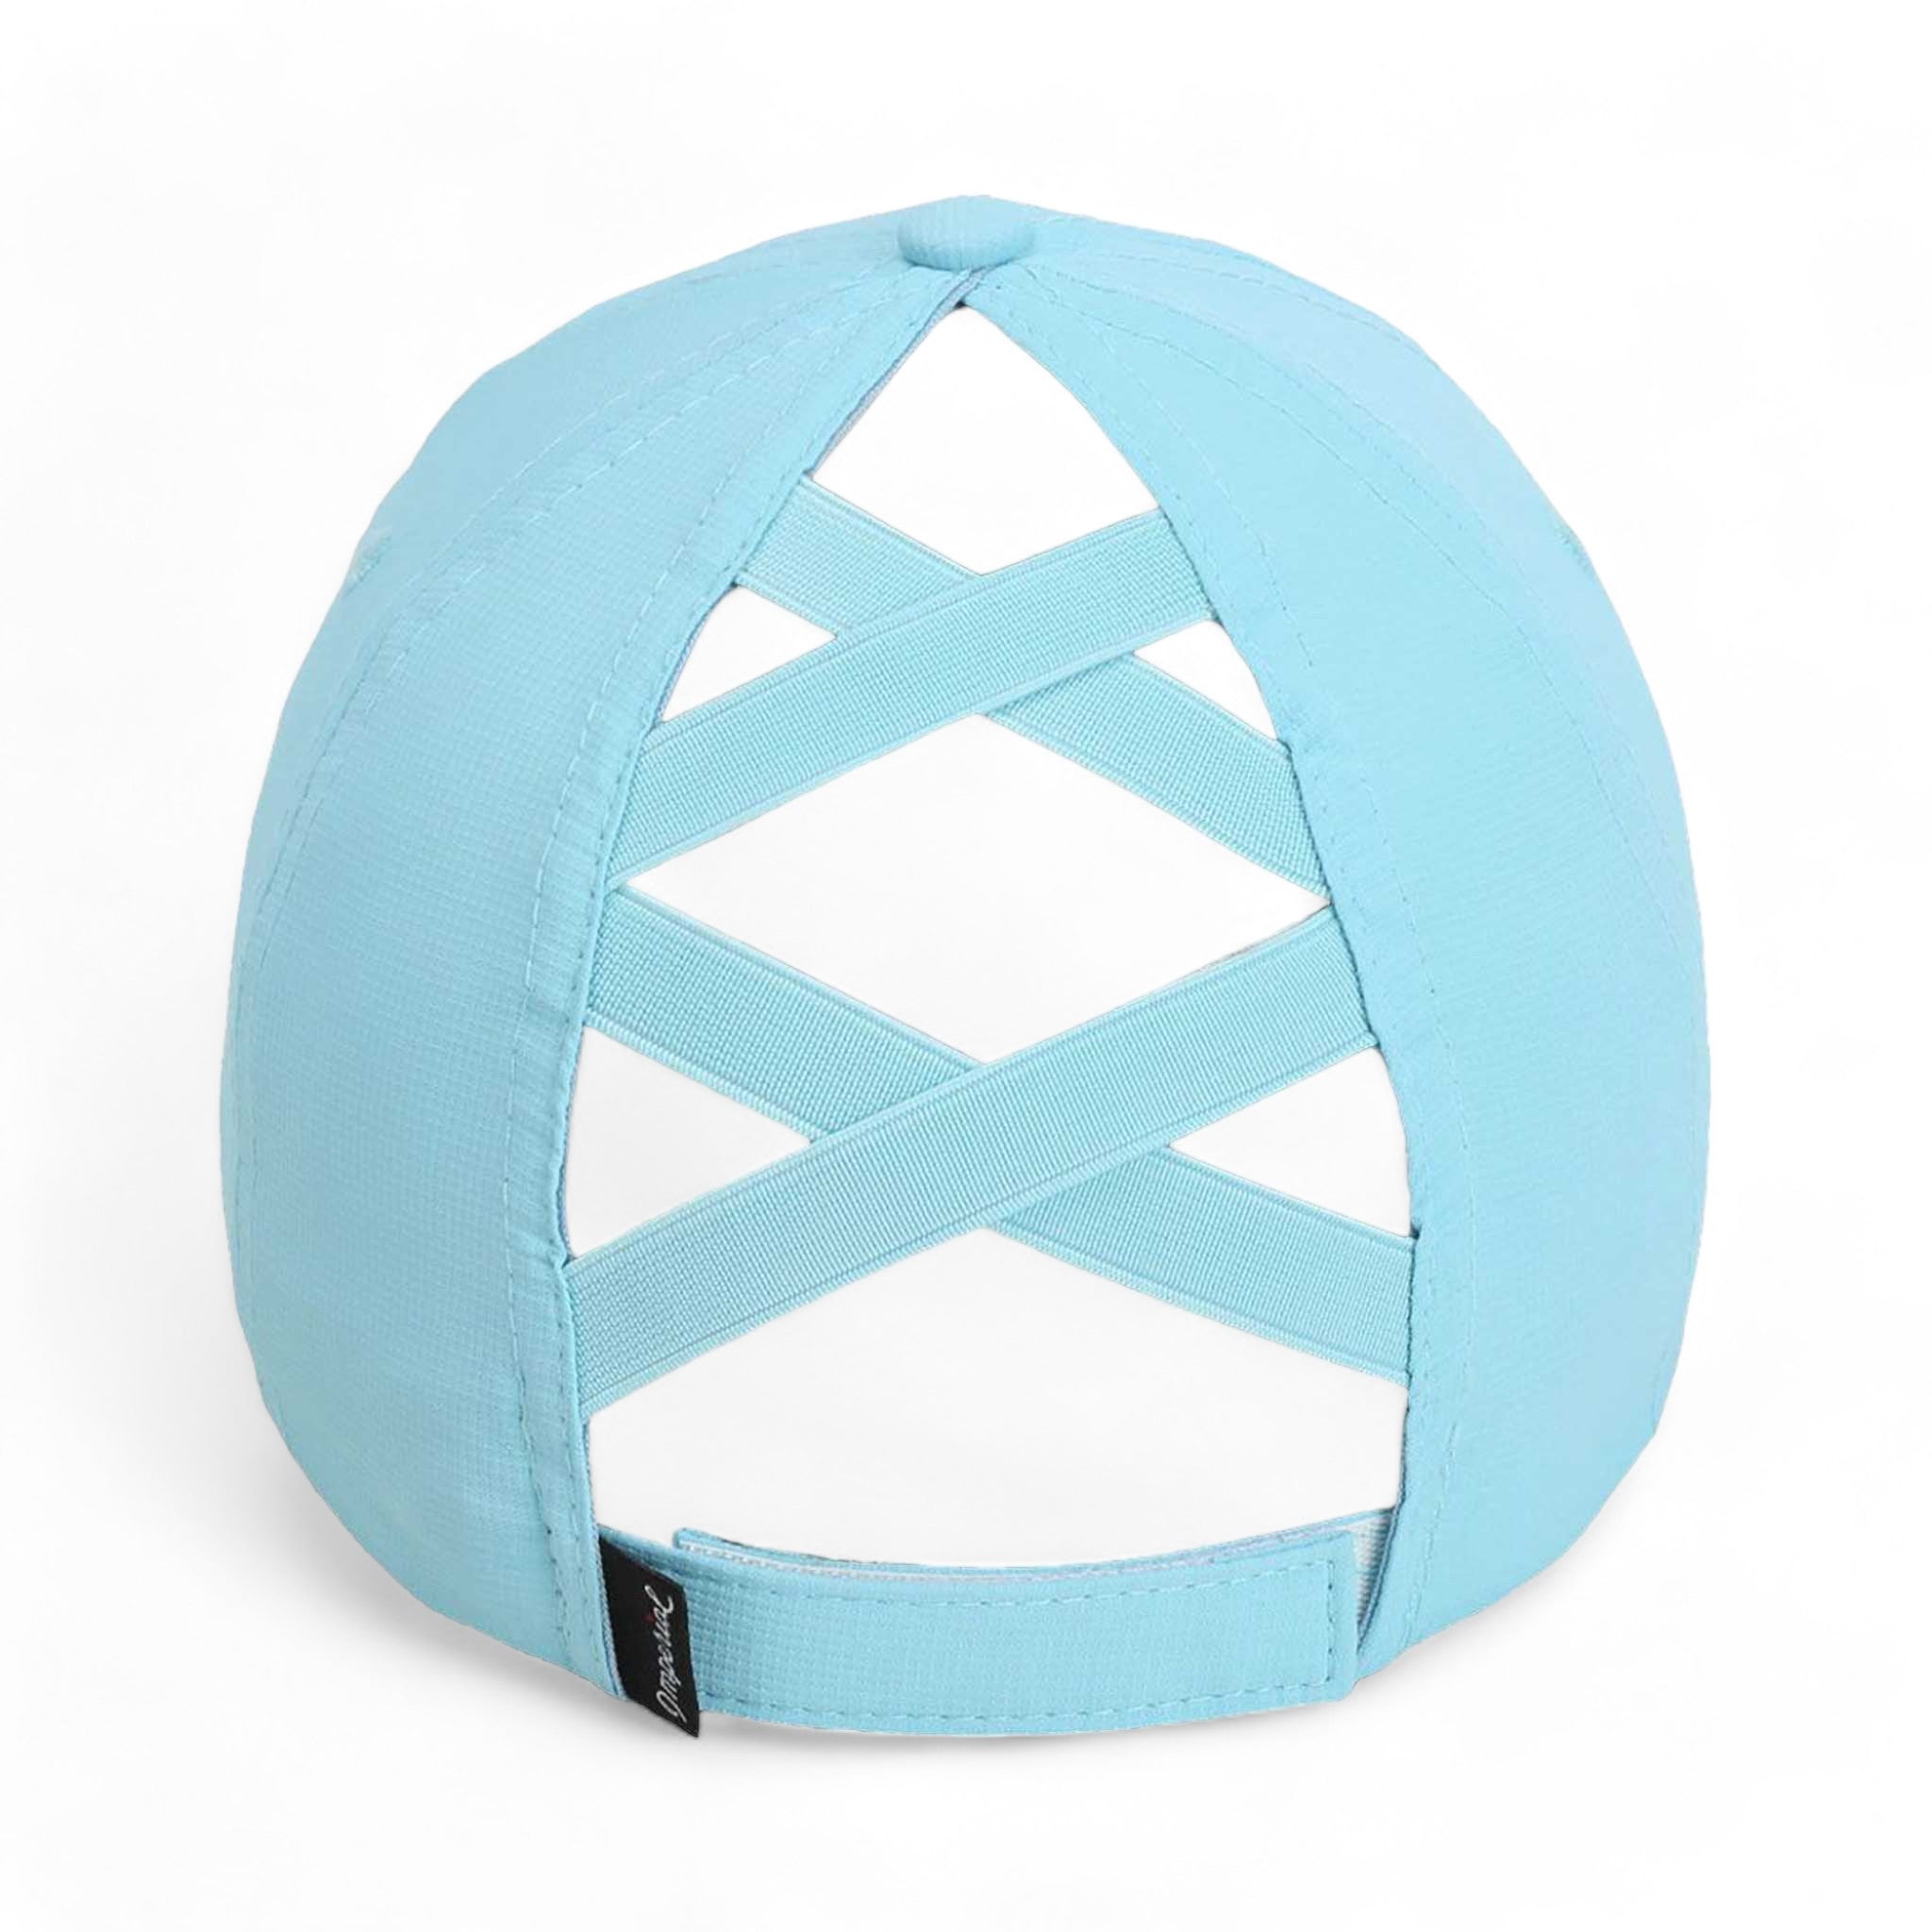 Back view of Imperial L338 custom hat in light blue